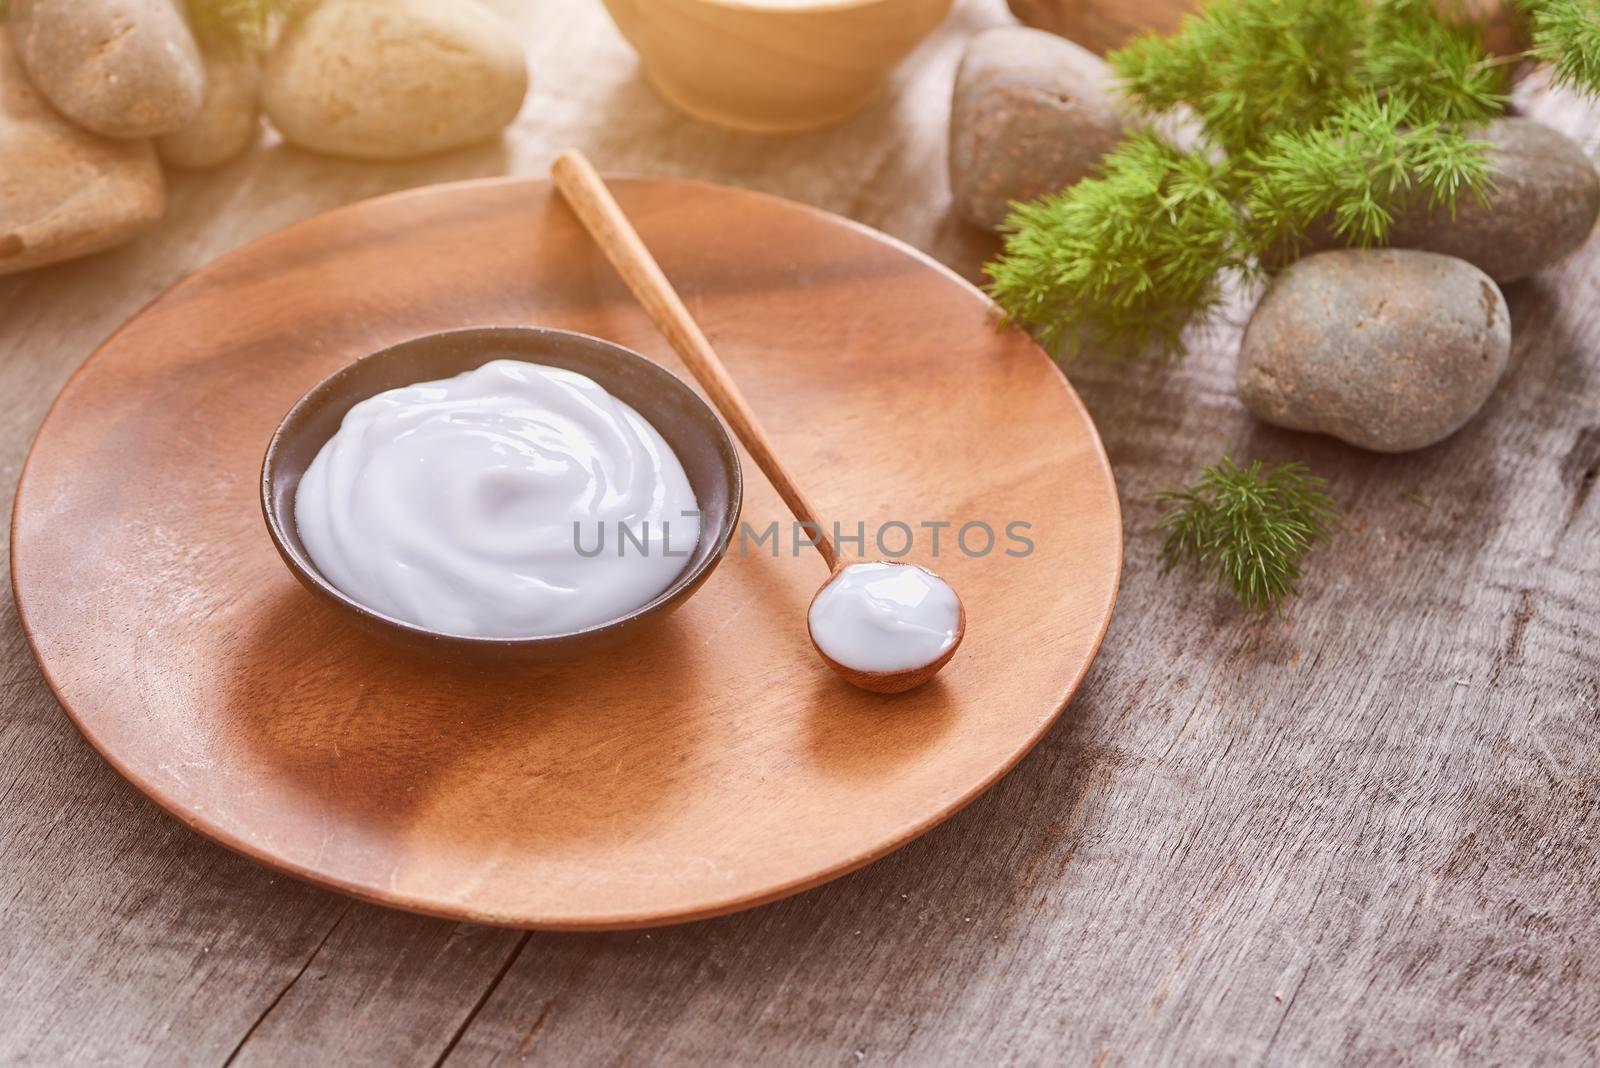 Preparing handmade hydrating natural gel and anti-aging cosmetic from extract of aloe vera leaves with pebbles and wooden background for zen beauty, top view by makidotvn